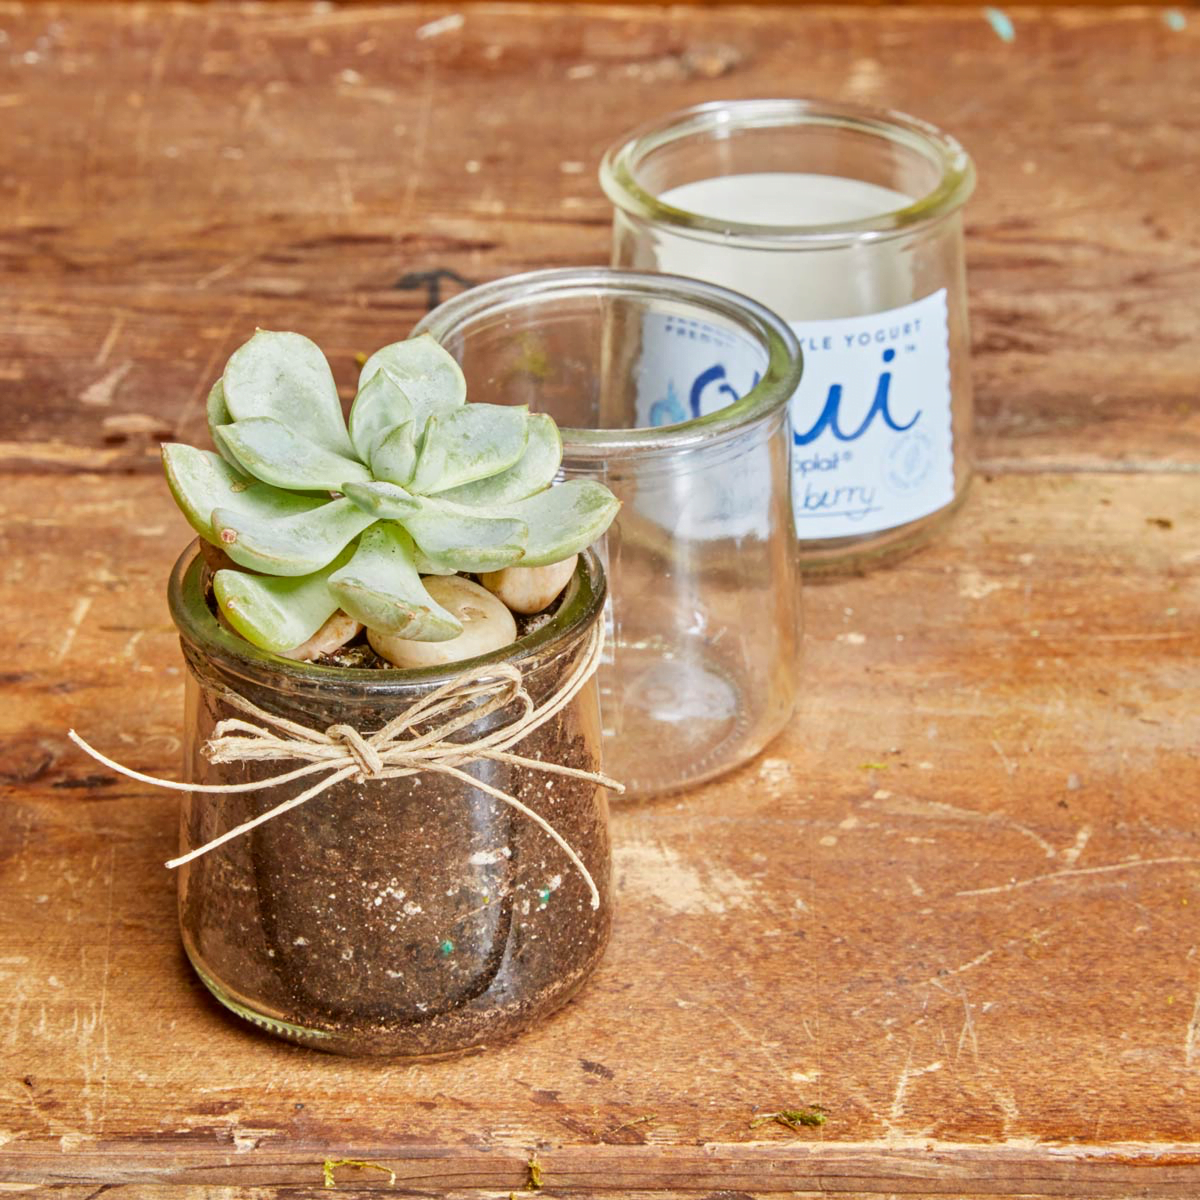 The Recycled Glass Jar Planter